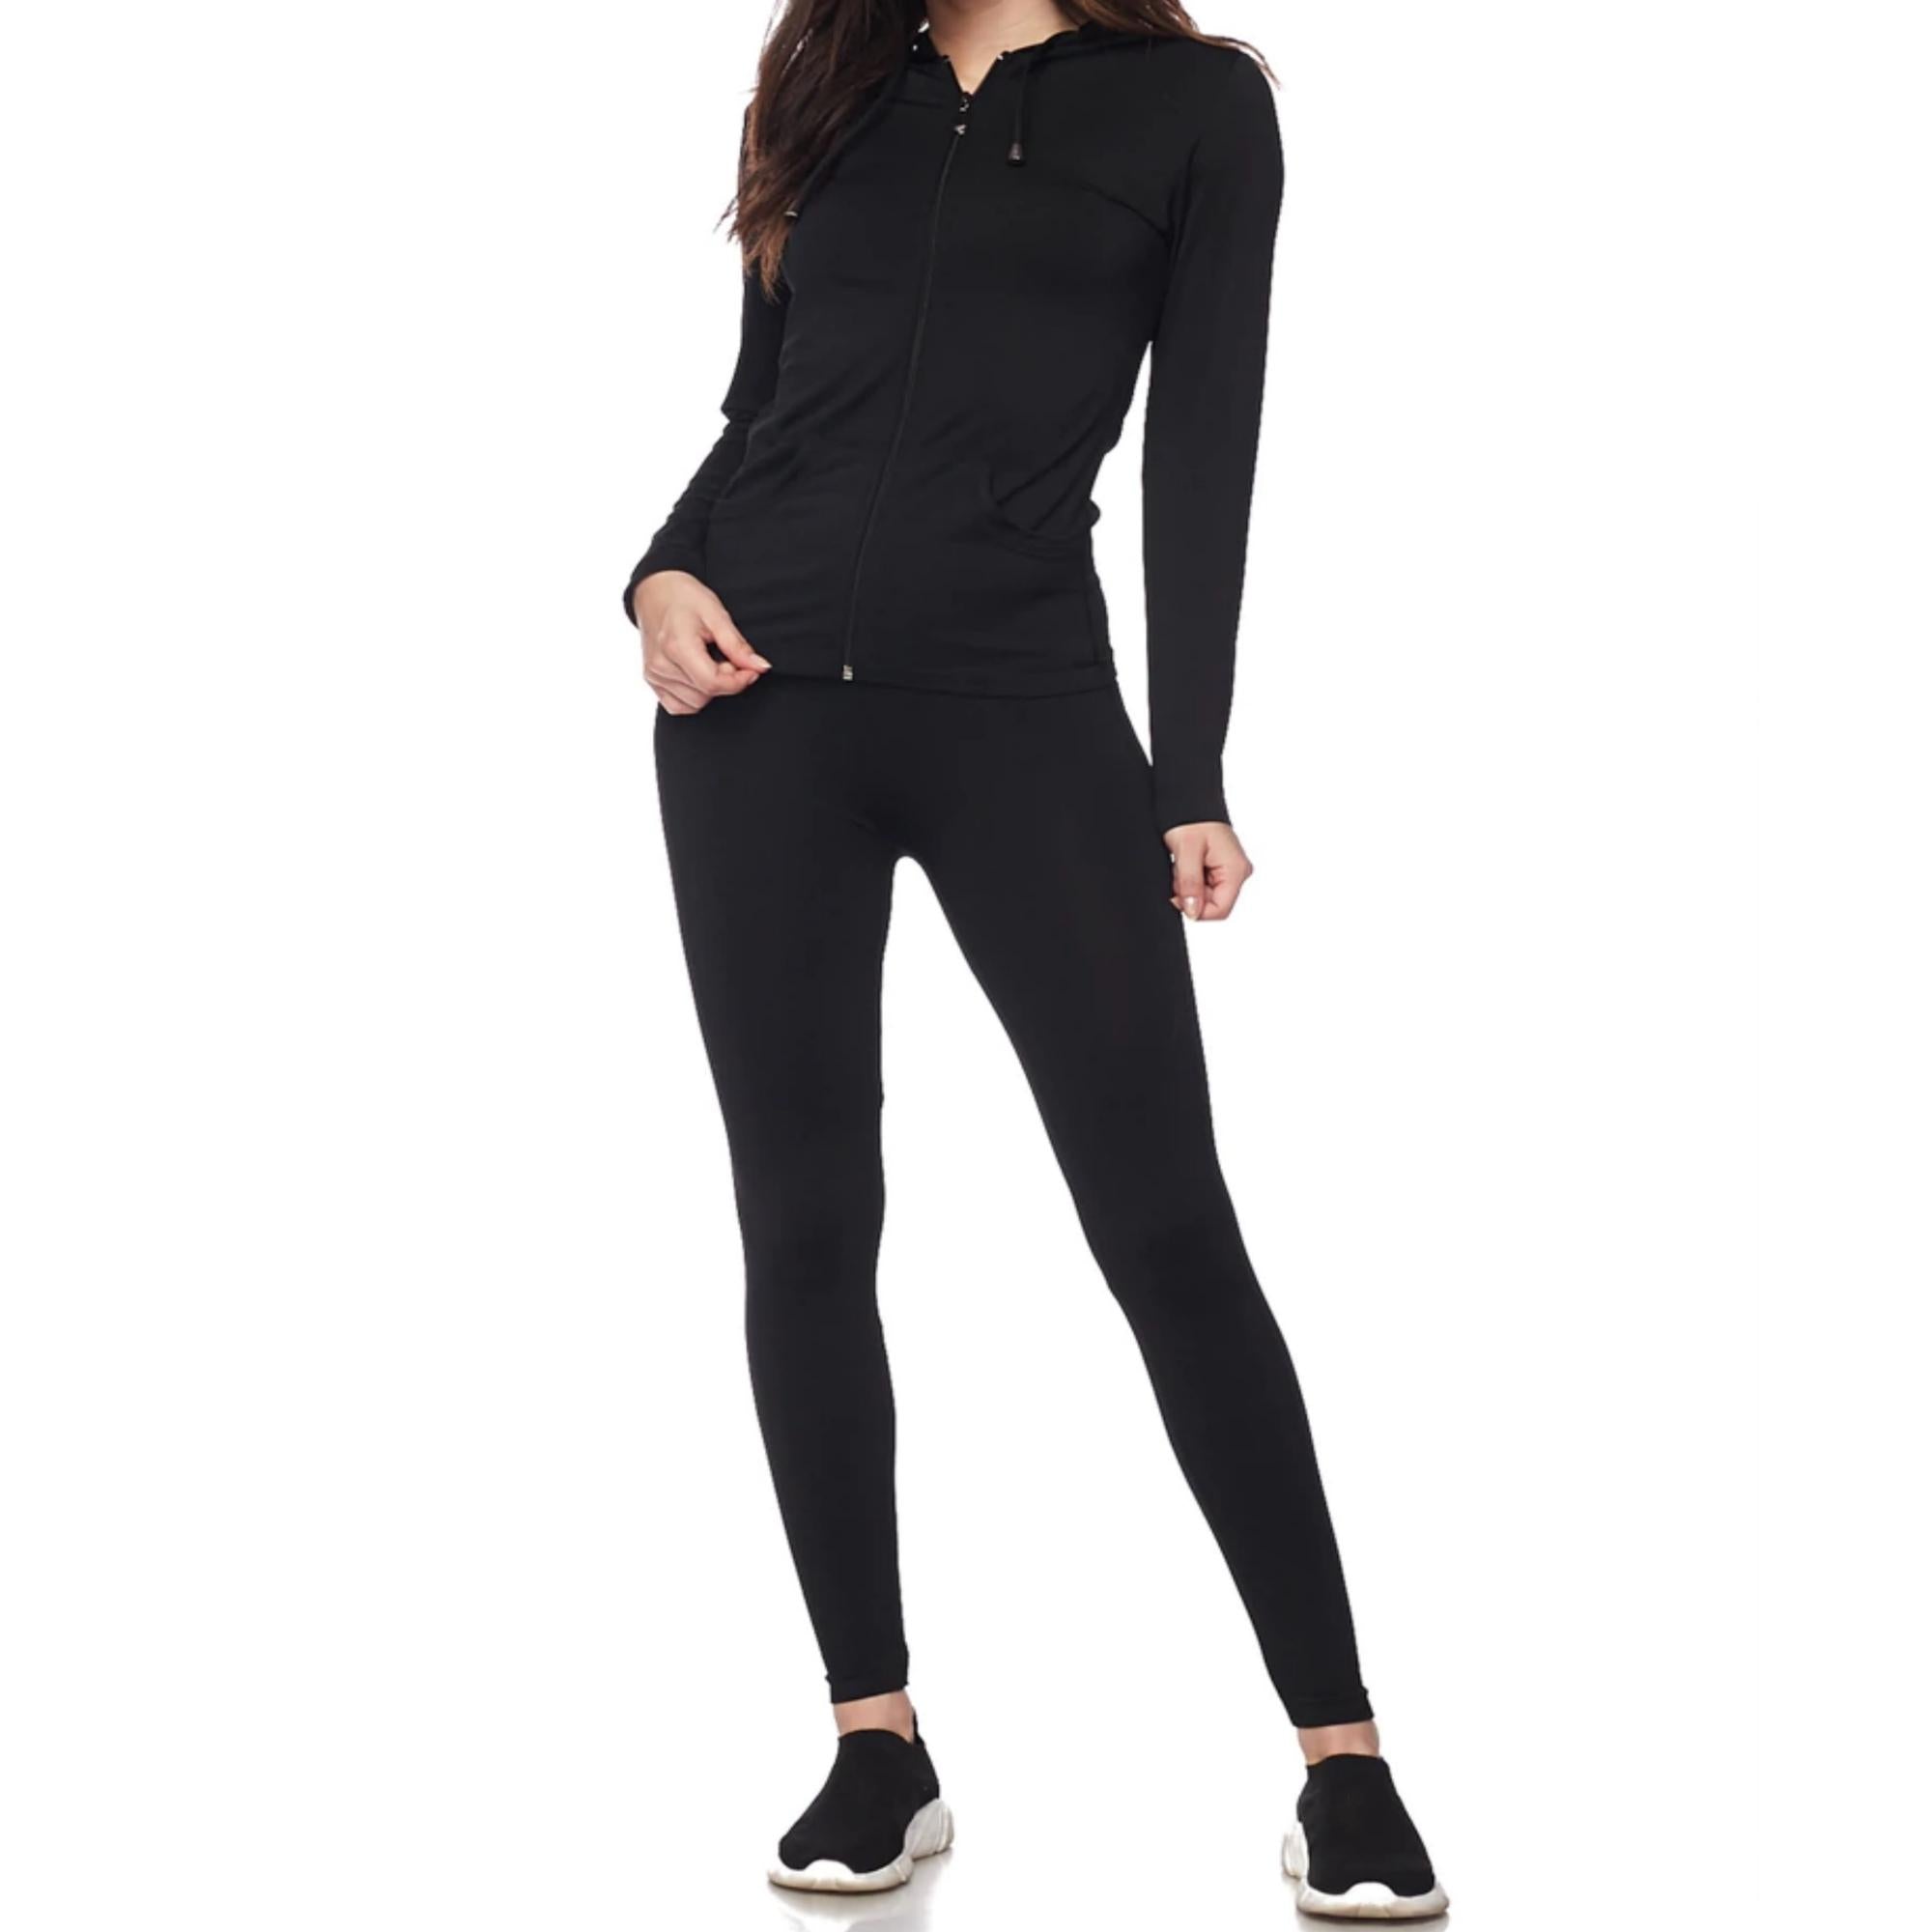 Women's Super-Stretch Comfy Yoga Legging & Workout Set with Zippered Jacket